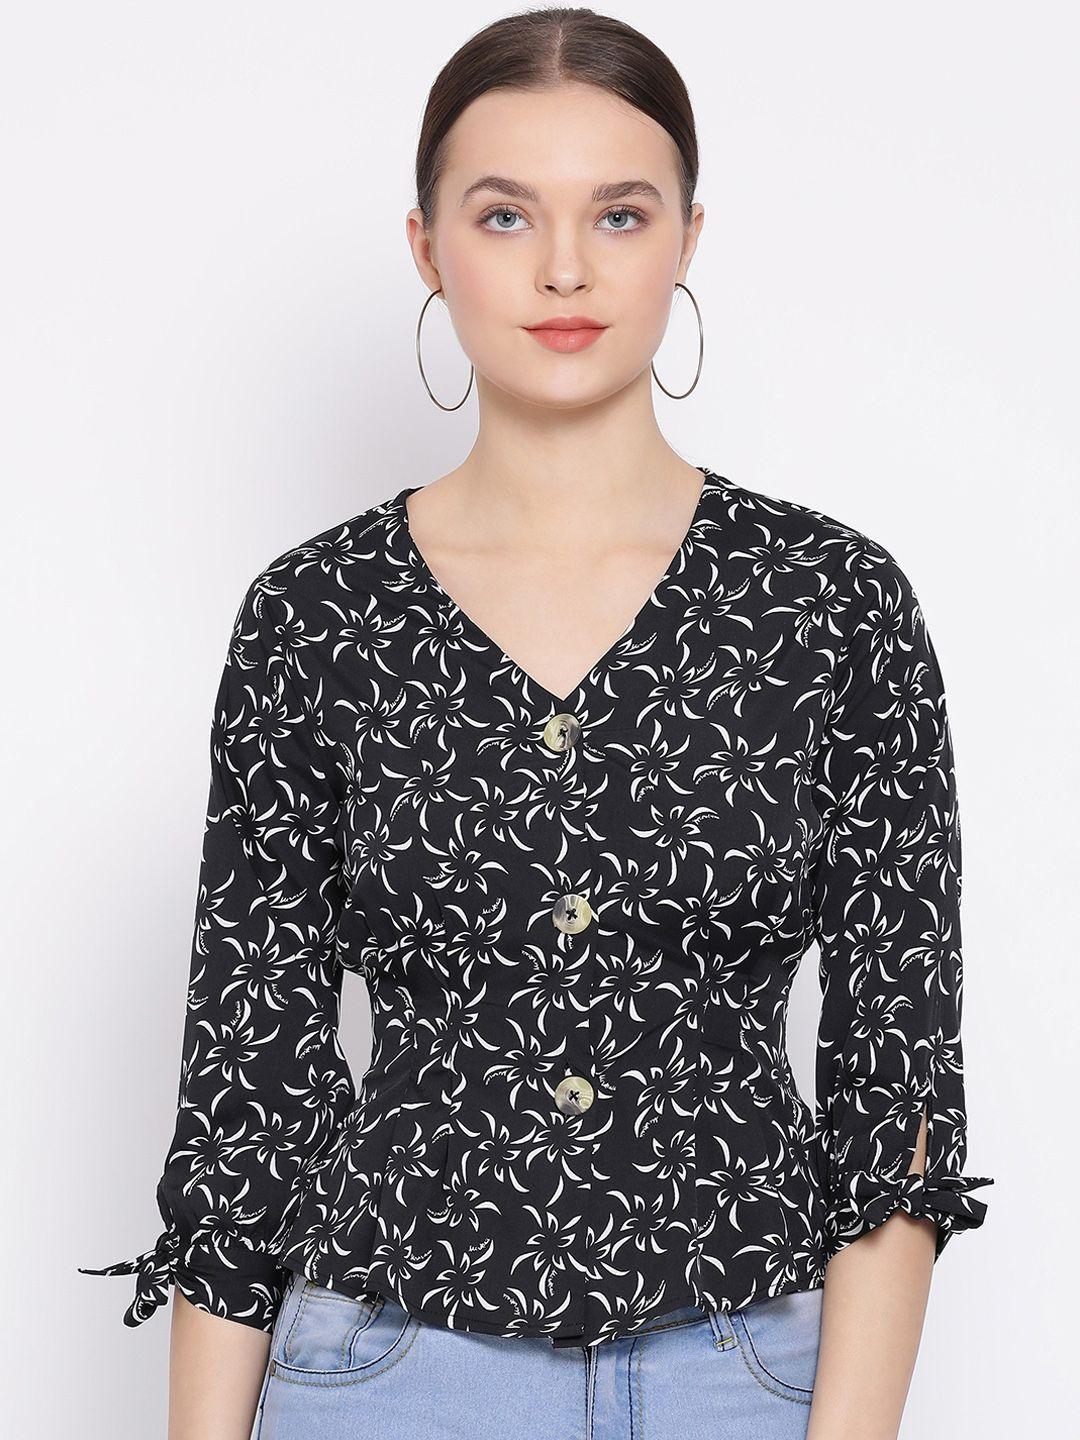 oxolloxo women black & white printed fitted top